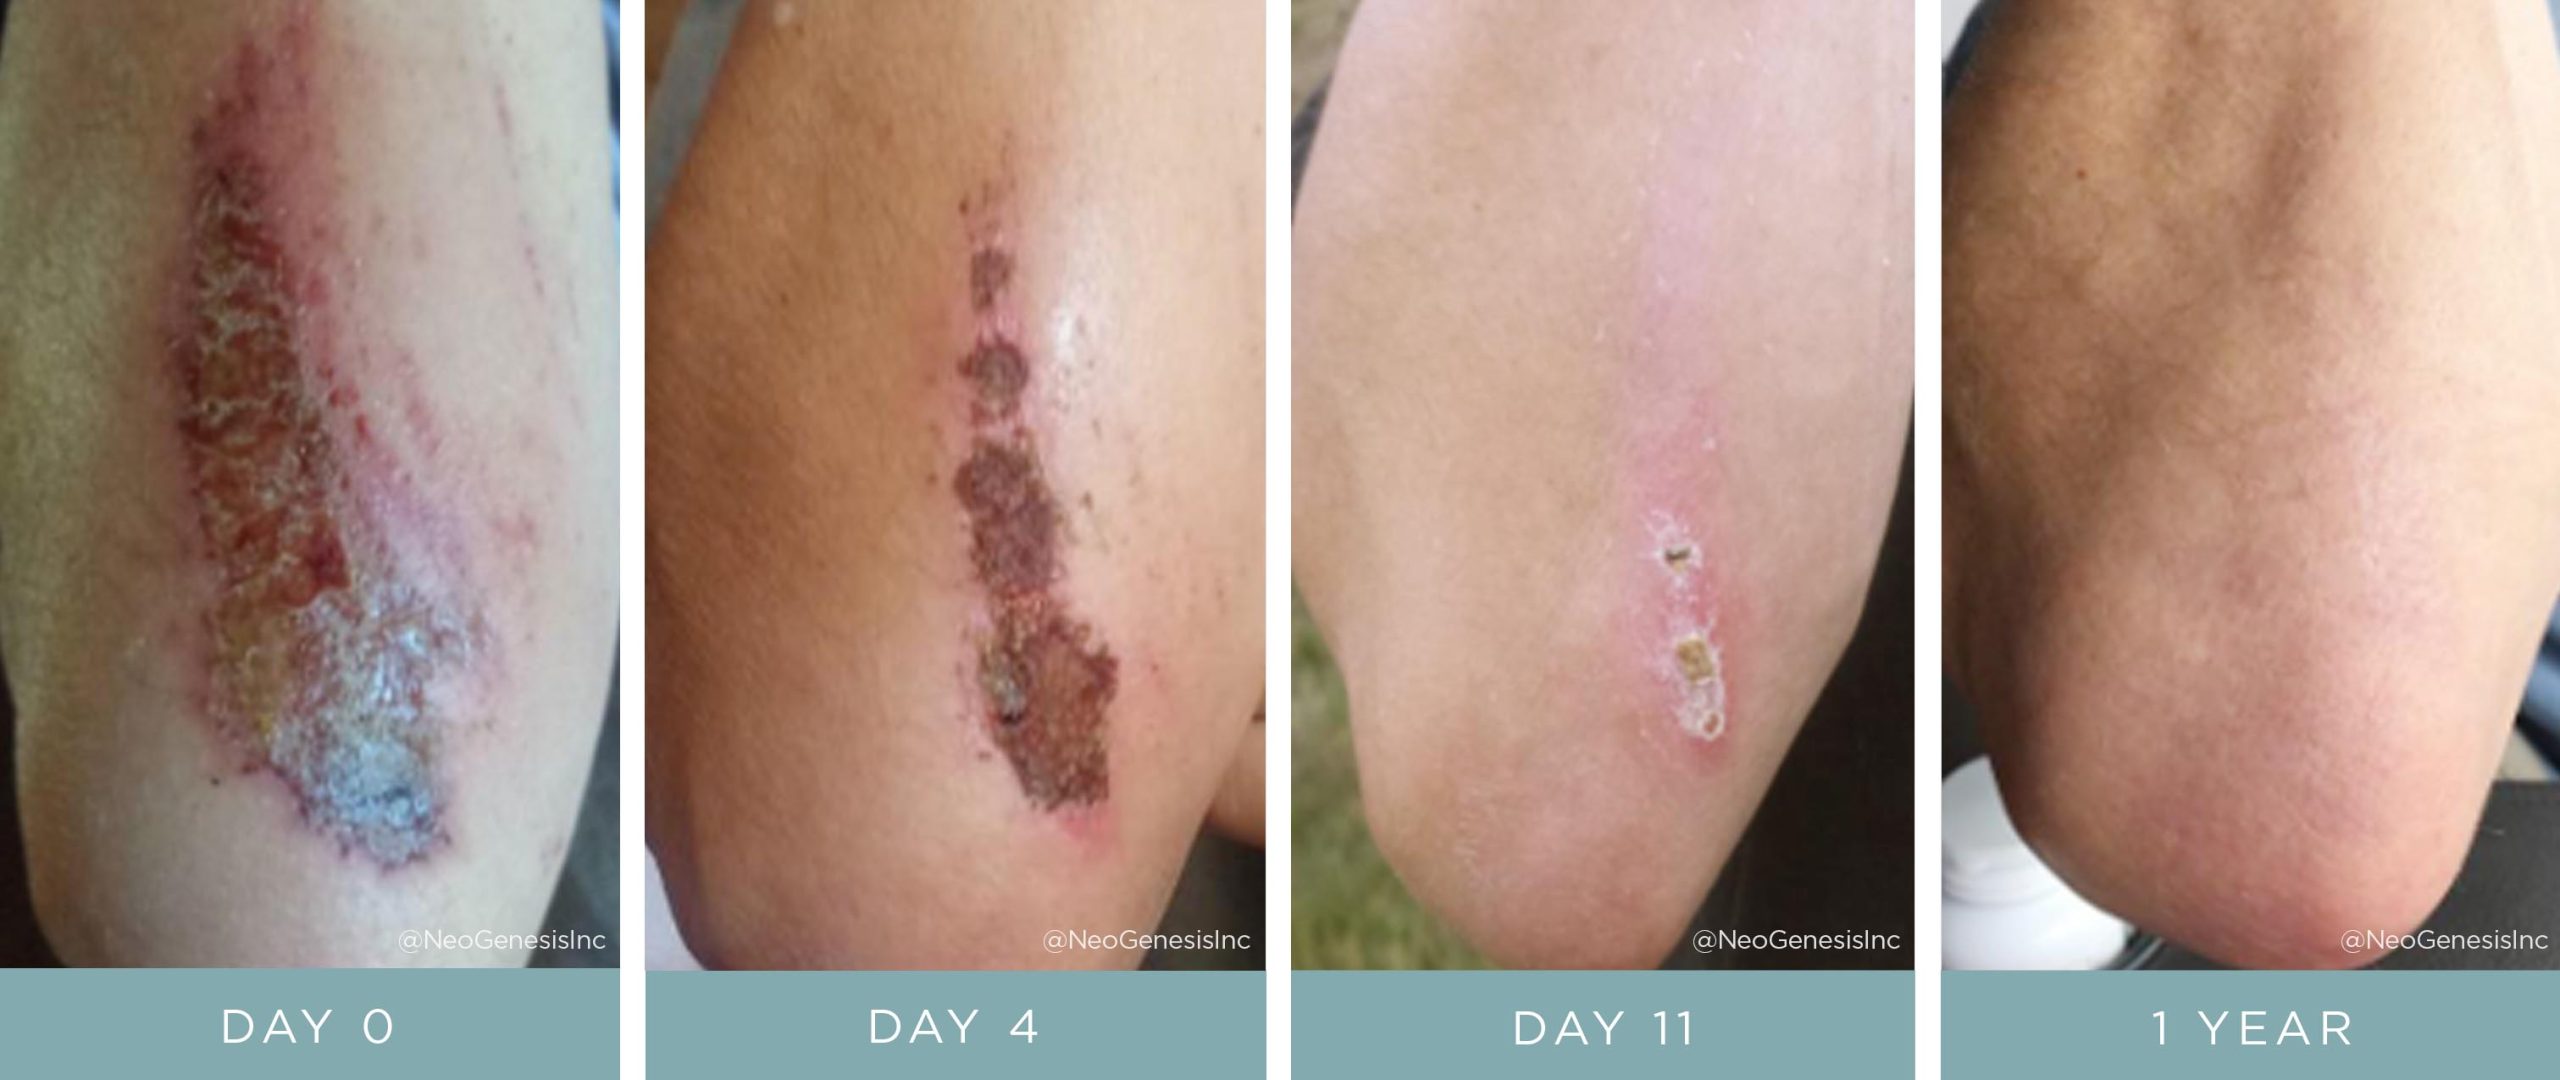 Before + After - Wound Care - Cycling Accident